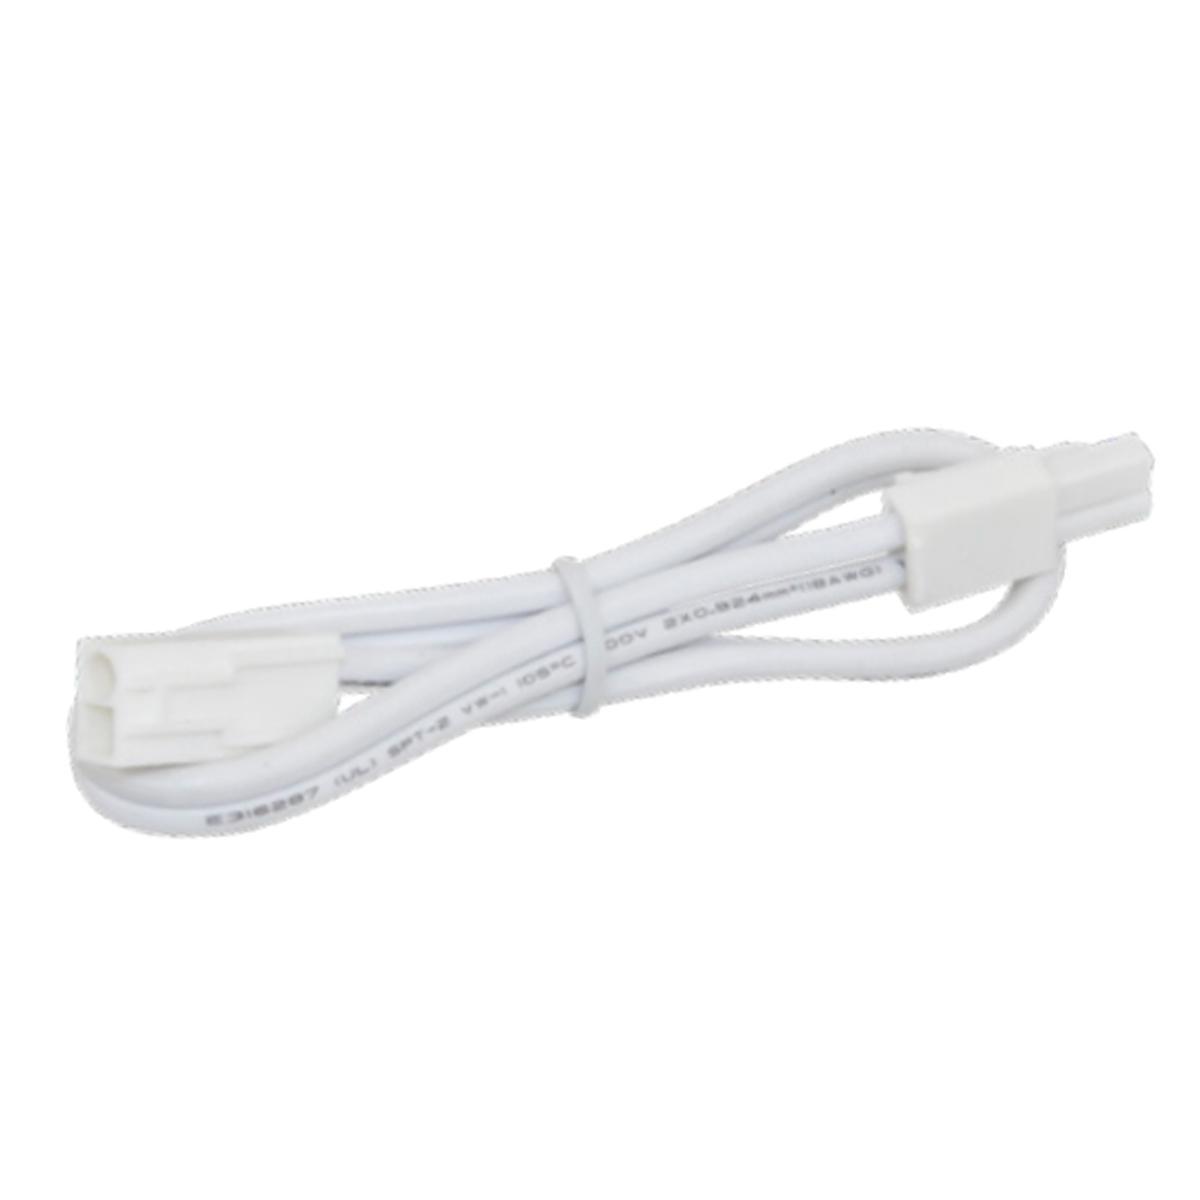 MVP 24in. Linking Cable, White - Bees Lighting